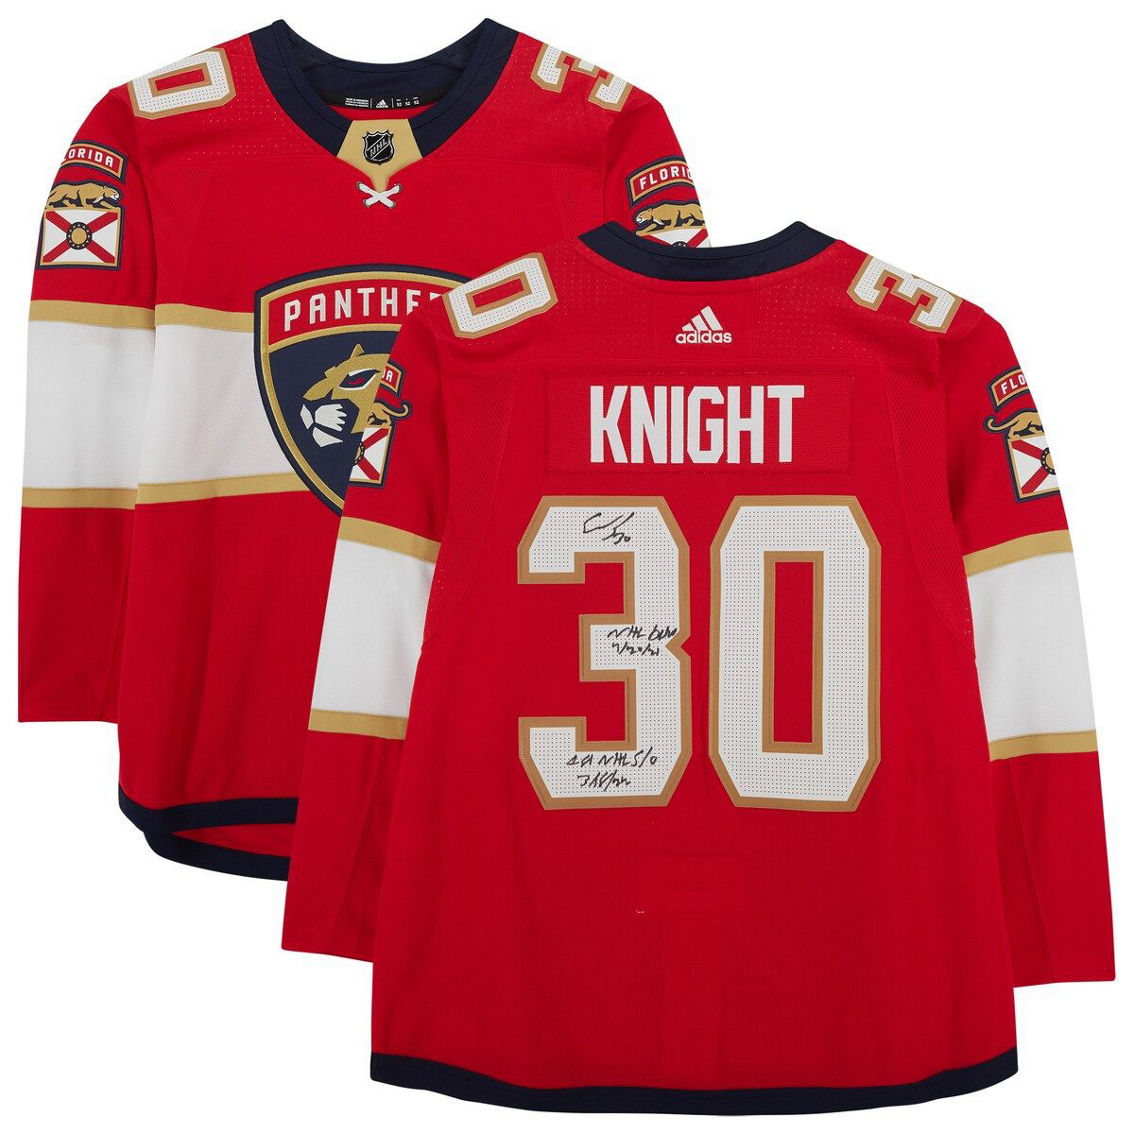 Fanatics Authentic Spencer Knight Florida Panthers Autographed Red Adidas Authentic Jersey with Multiple Inscriptions - Image 2 of 4